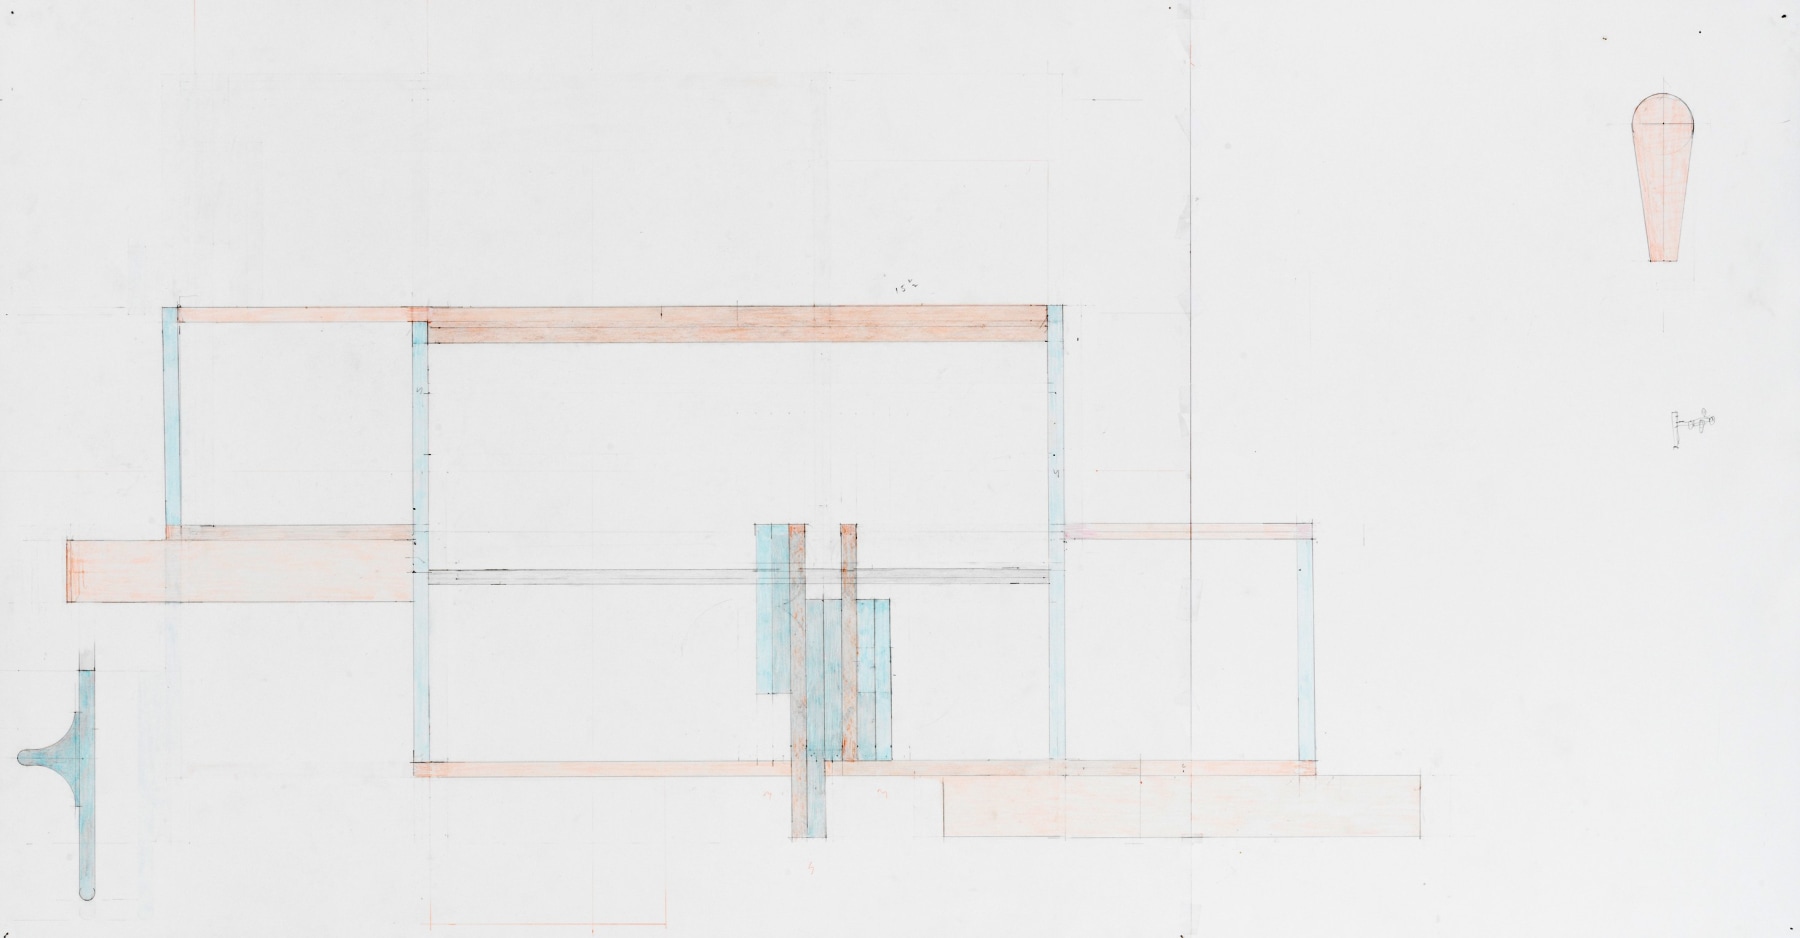 Richard Rezac
Study for Soliliquy, 2019
Colored pencil and graphite on paper
23 x 43 7/8 inches
(58.4 x 111.4 cm)